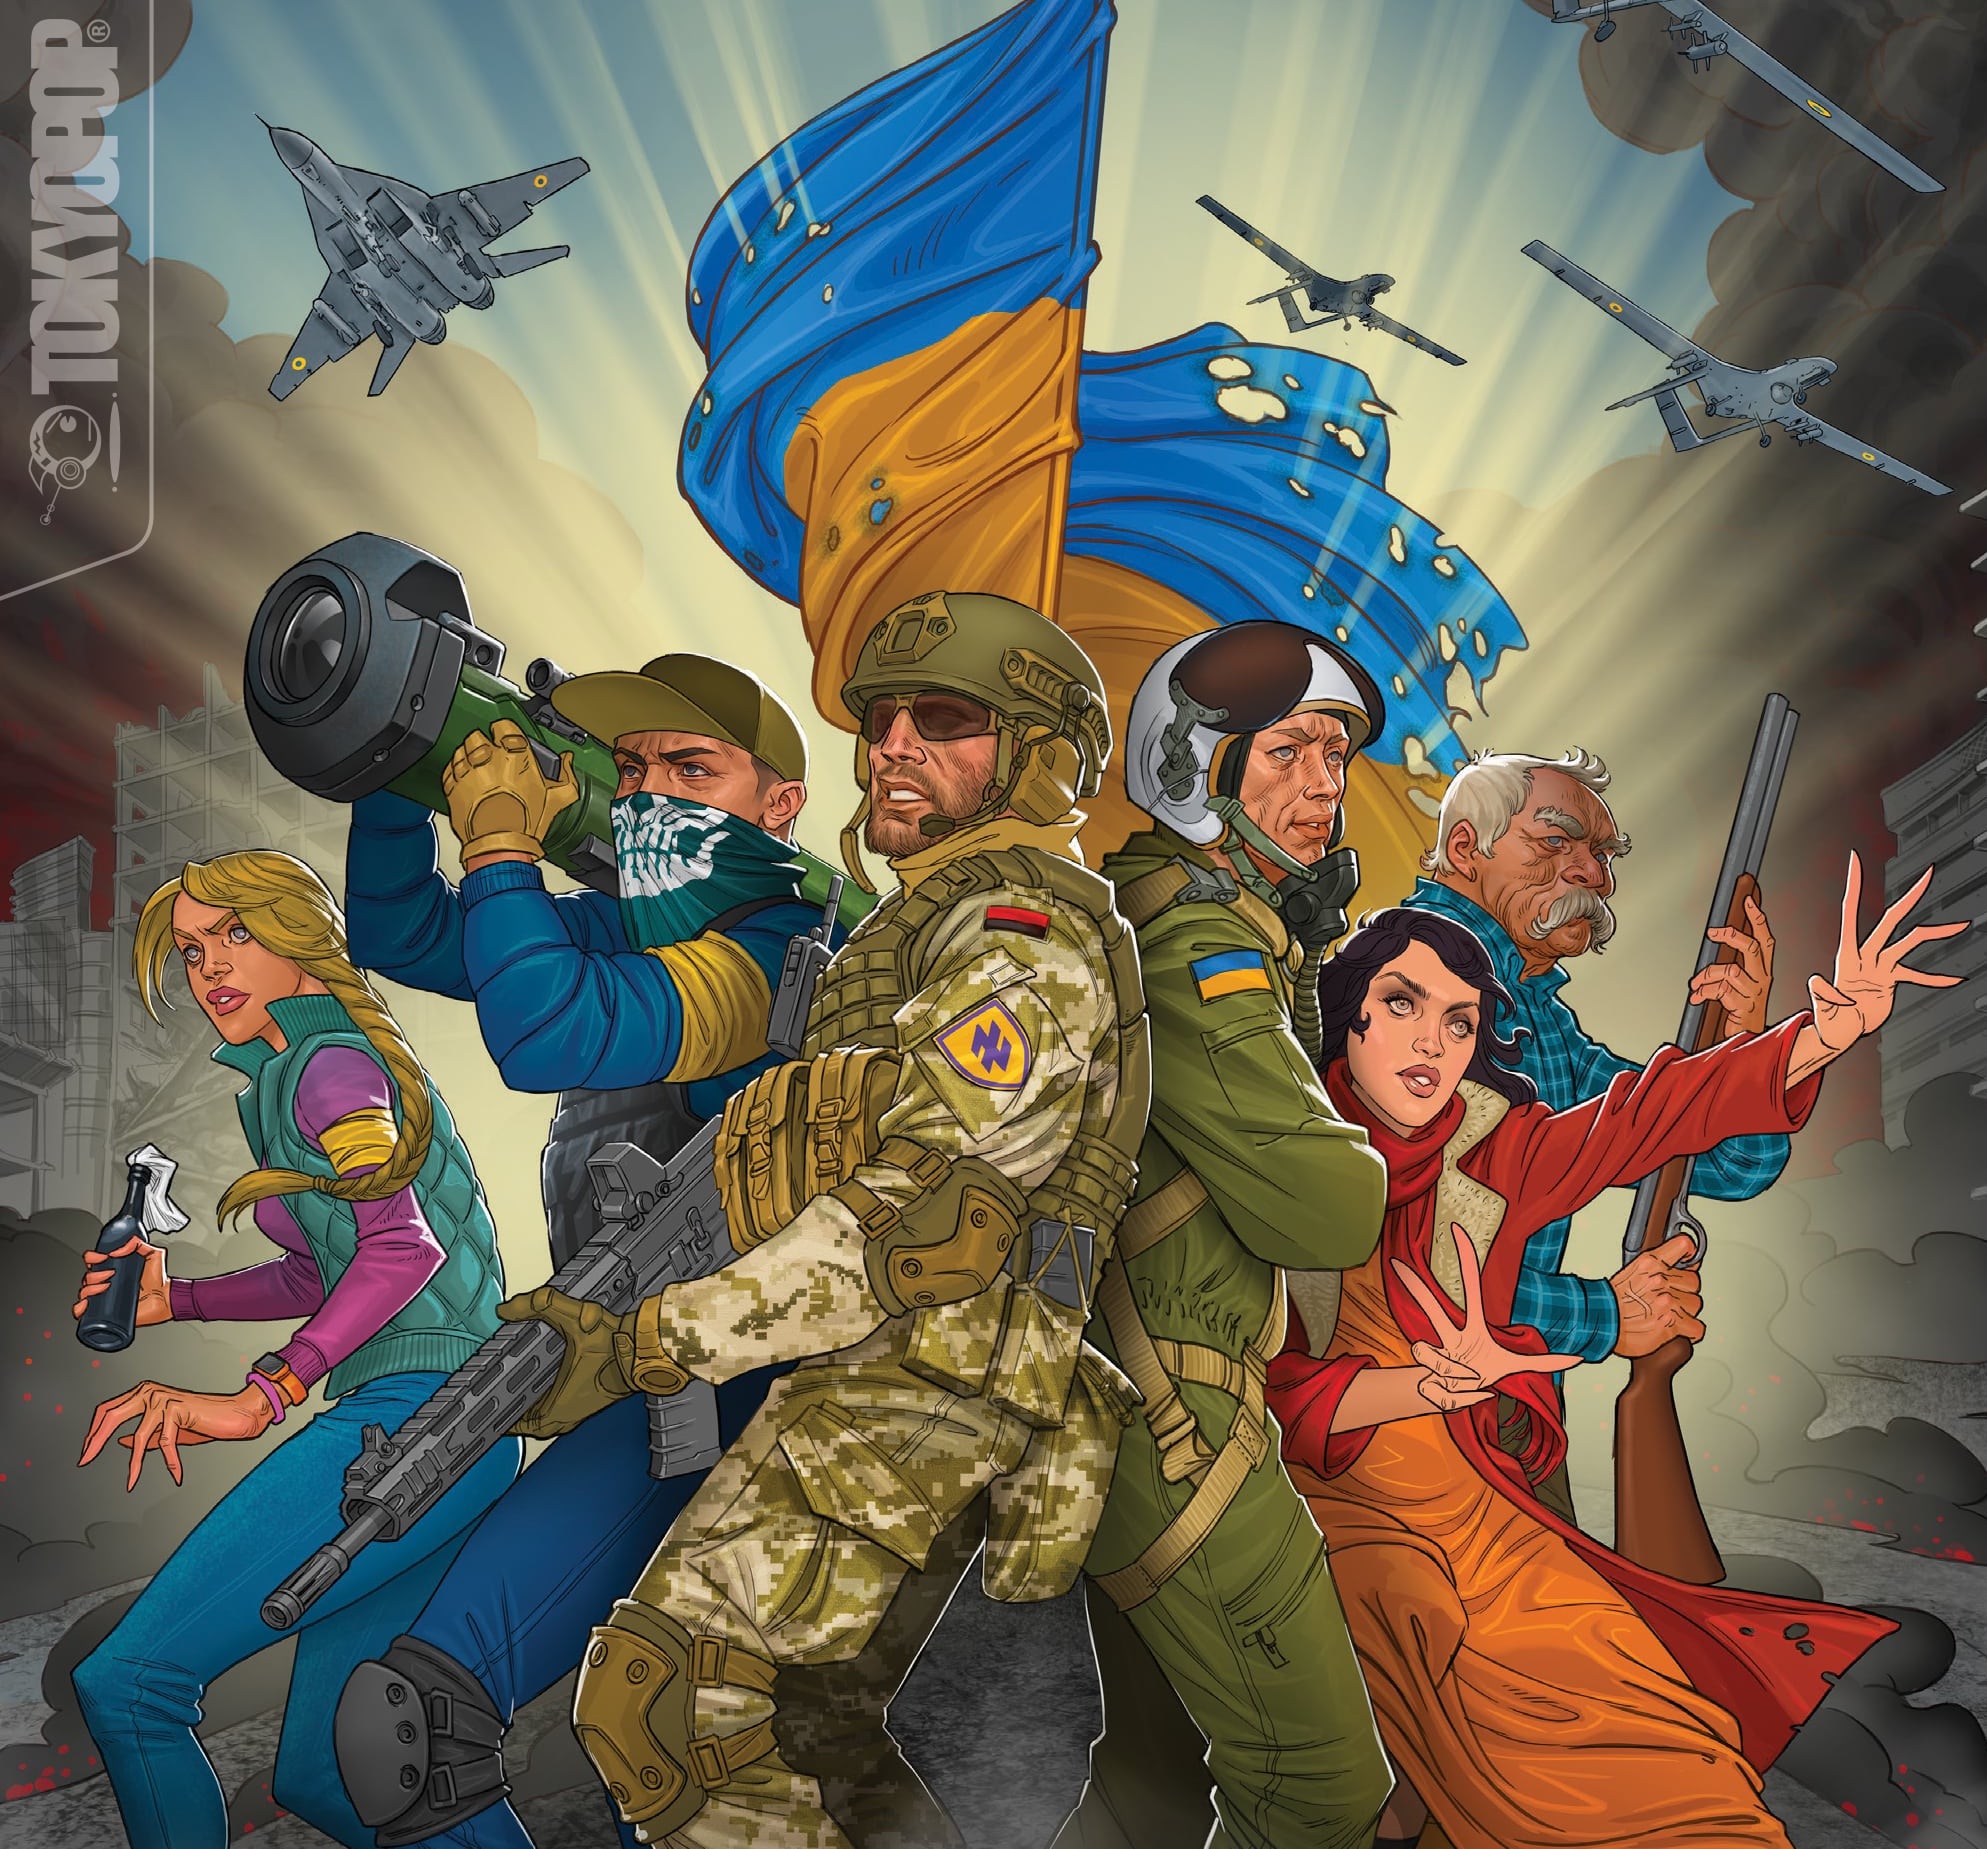 Tokyopop launches 'Peremoha: Victory For Ukraine' anthology